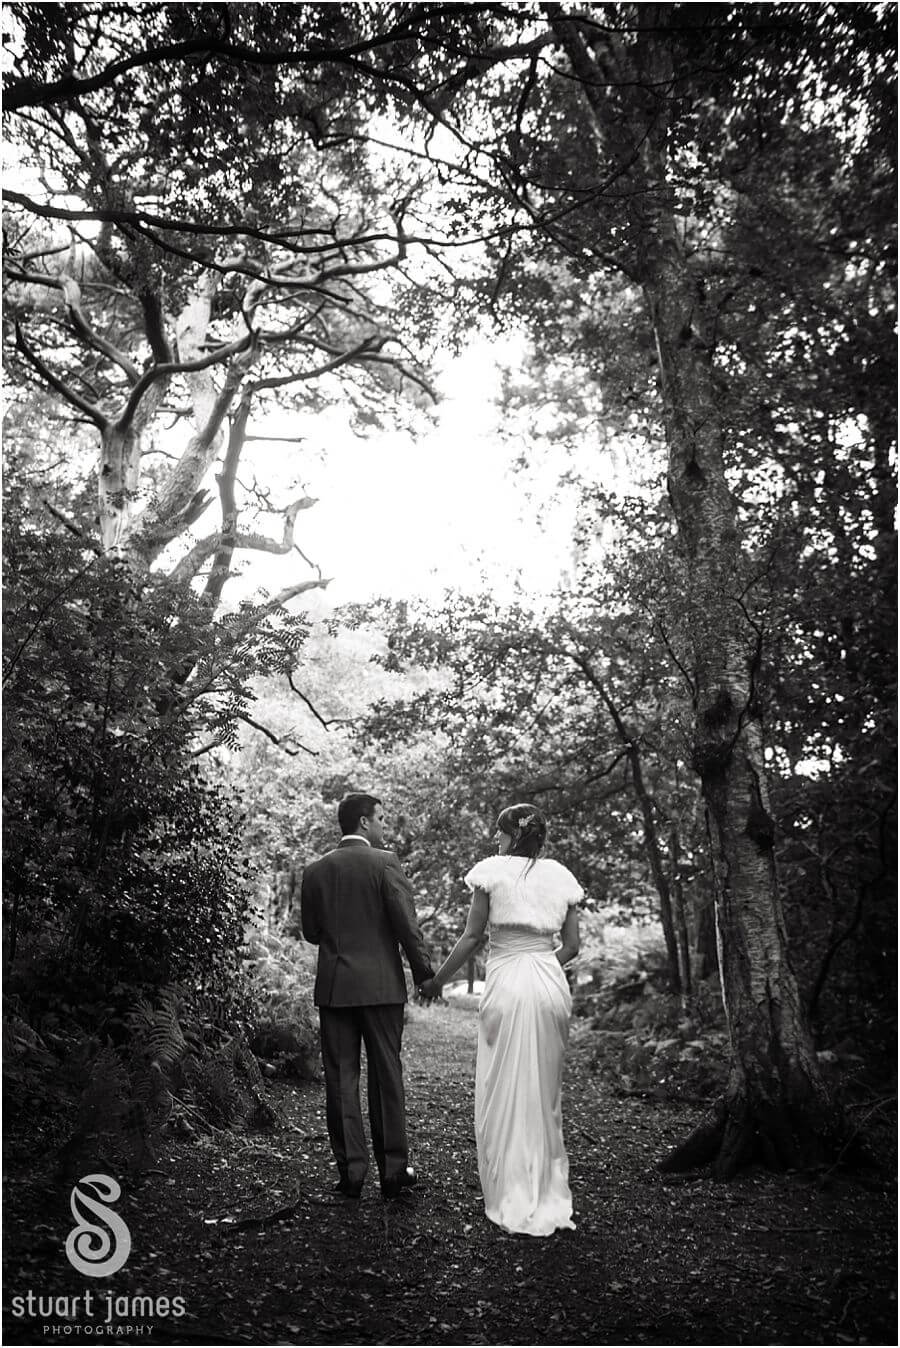 Travelling a short distance from The Barns in Cannock , Cannock Chase is the perfect setting for beautiful portraits of Bride and Groom by Modern Creative Wedding Photographer Stuart James